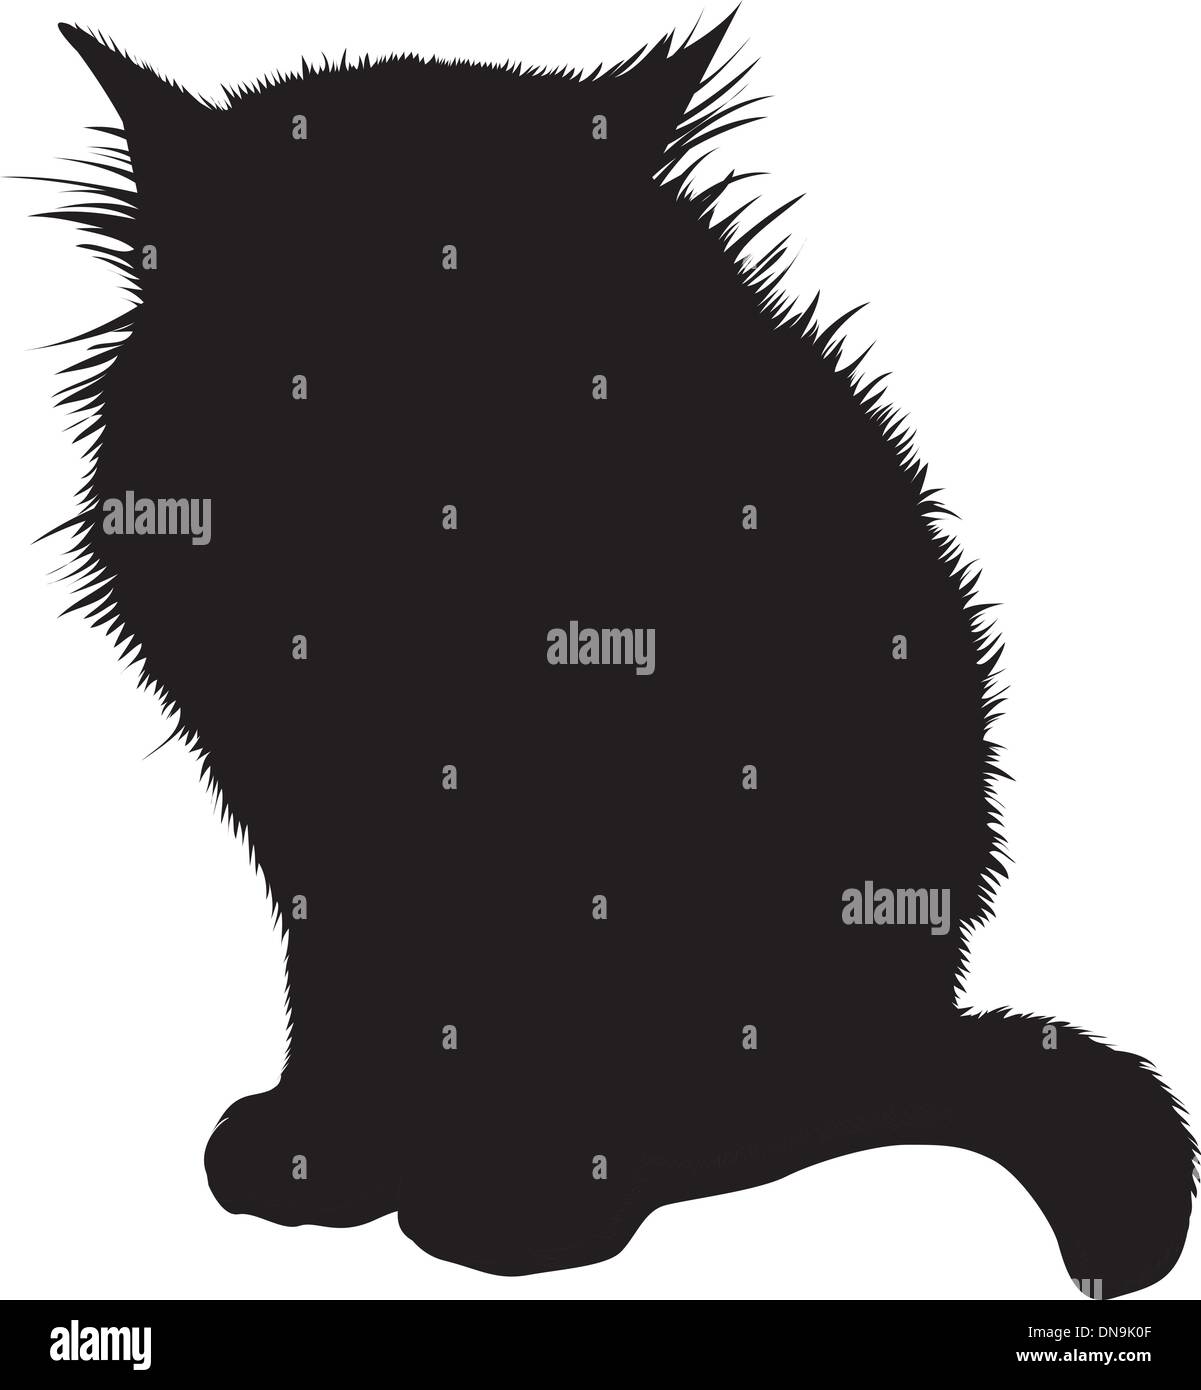 Funny dlack cat silhouette for your design Poster